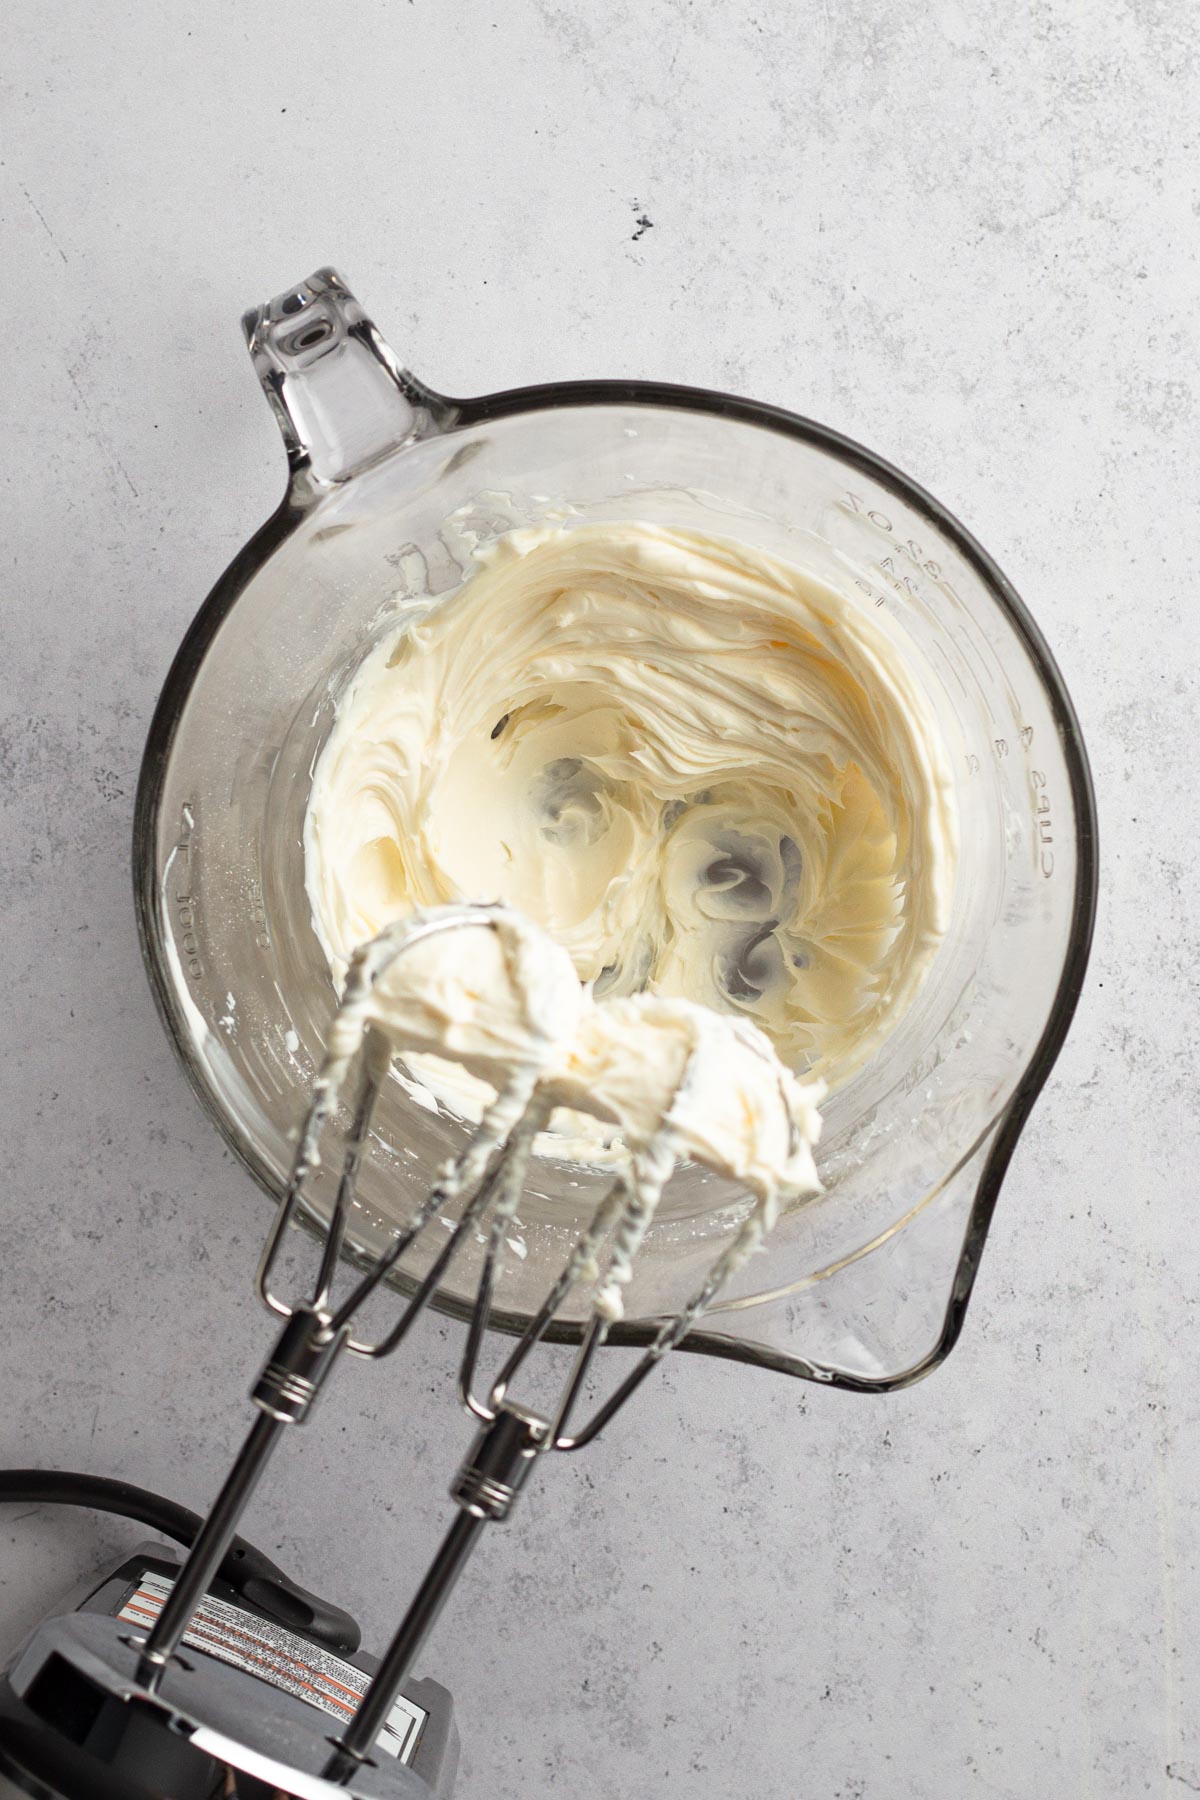 Cream cheese mixture blended in a glass mixing bowl.